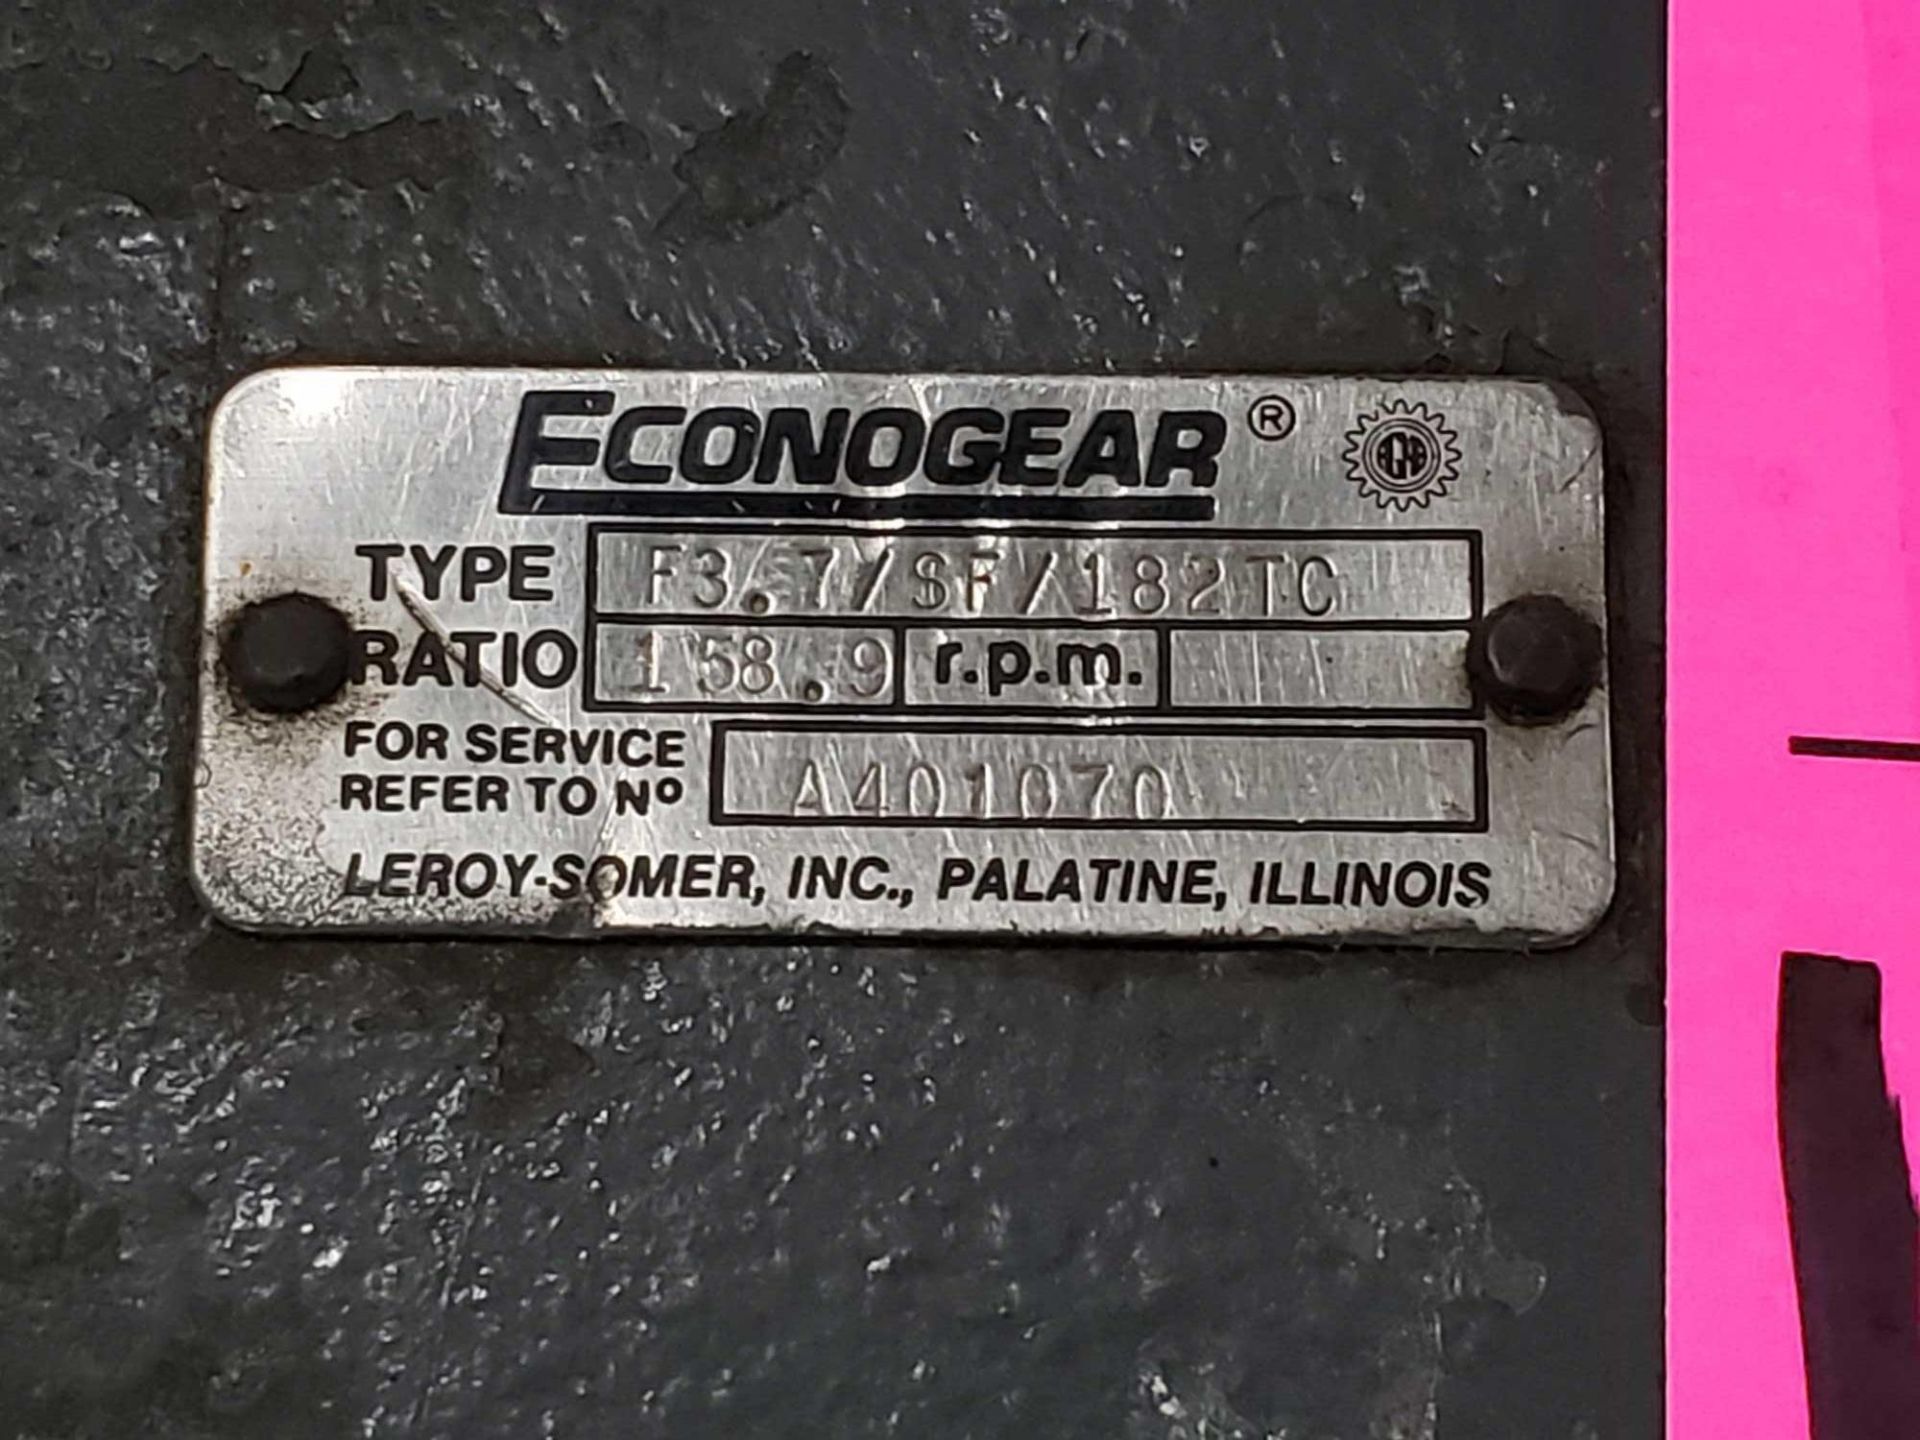 Leroy-Somer Econogear type F3.7/SF/182TC, ratio 158.9 to 1. Appears unused with shelf wear. - Image 2 of 5